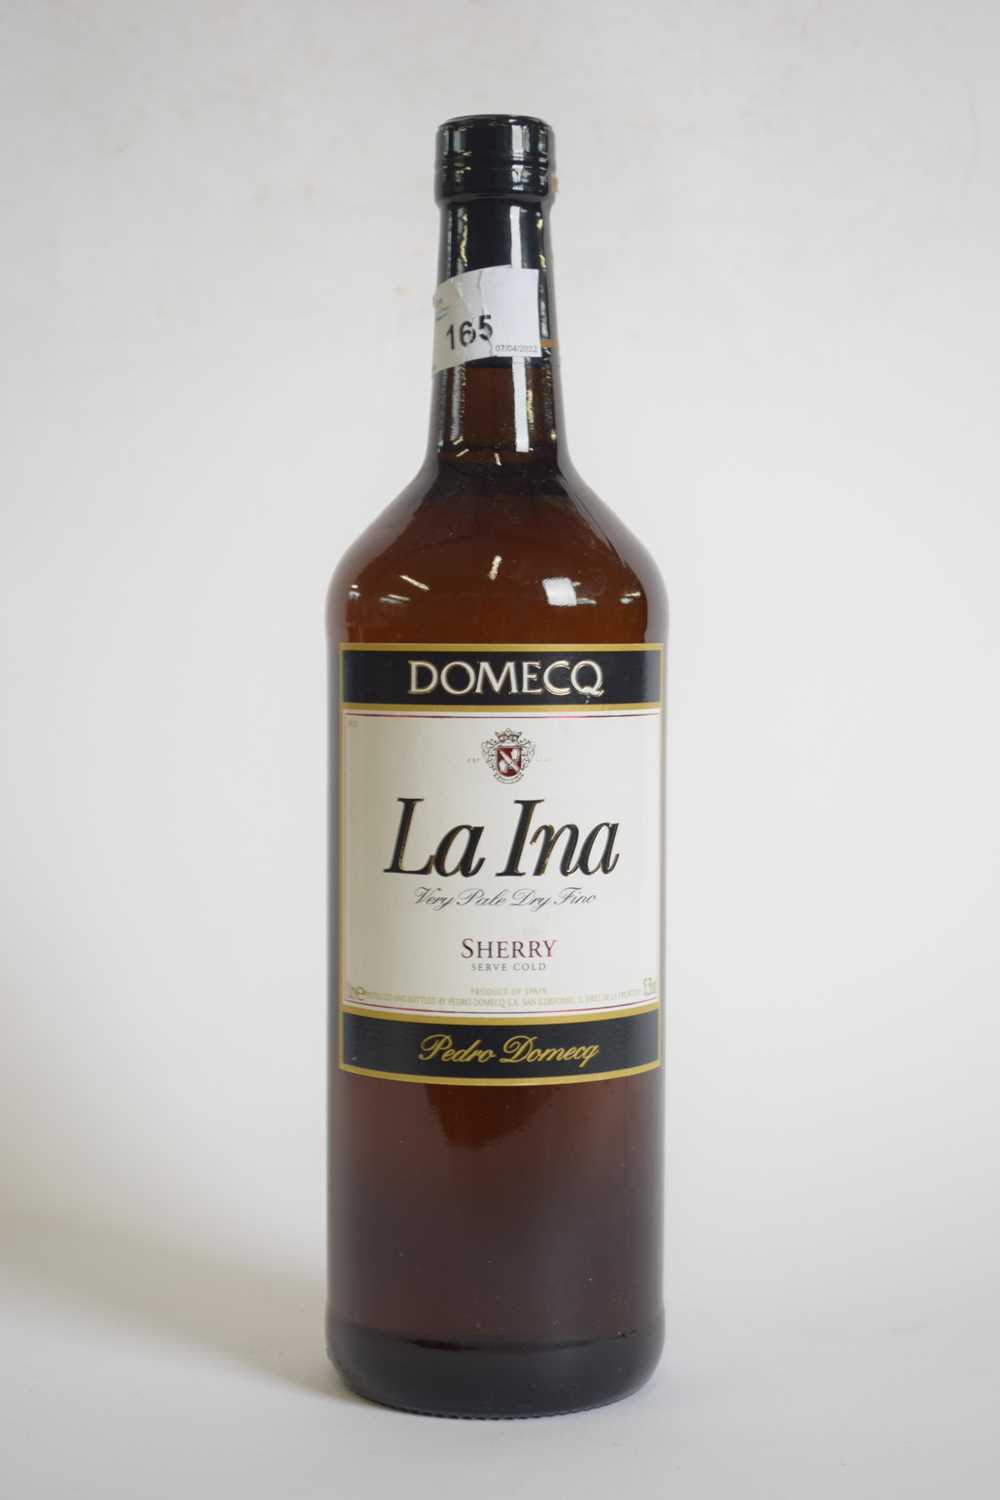 One bottle Domecq la Ina Sherry, 1 ltr - Image 2 of 2